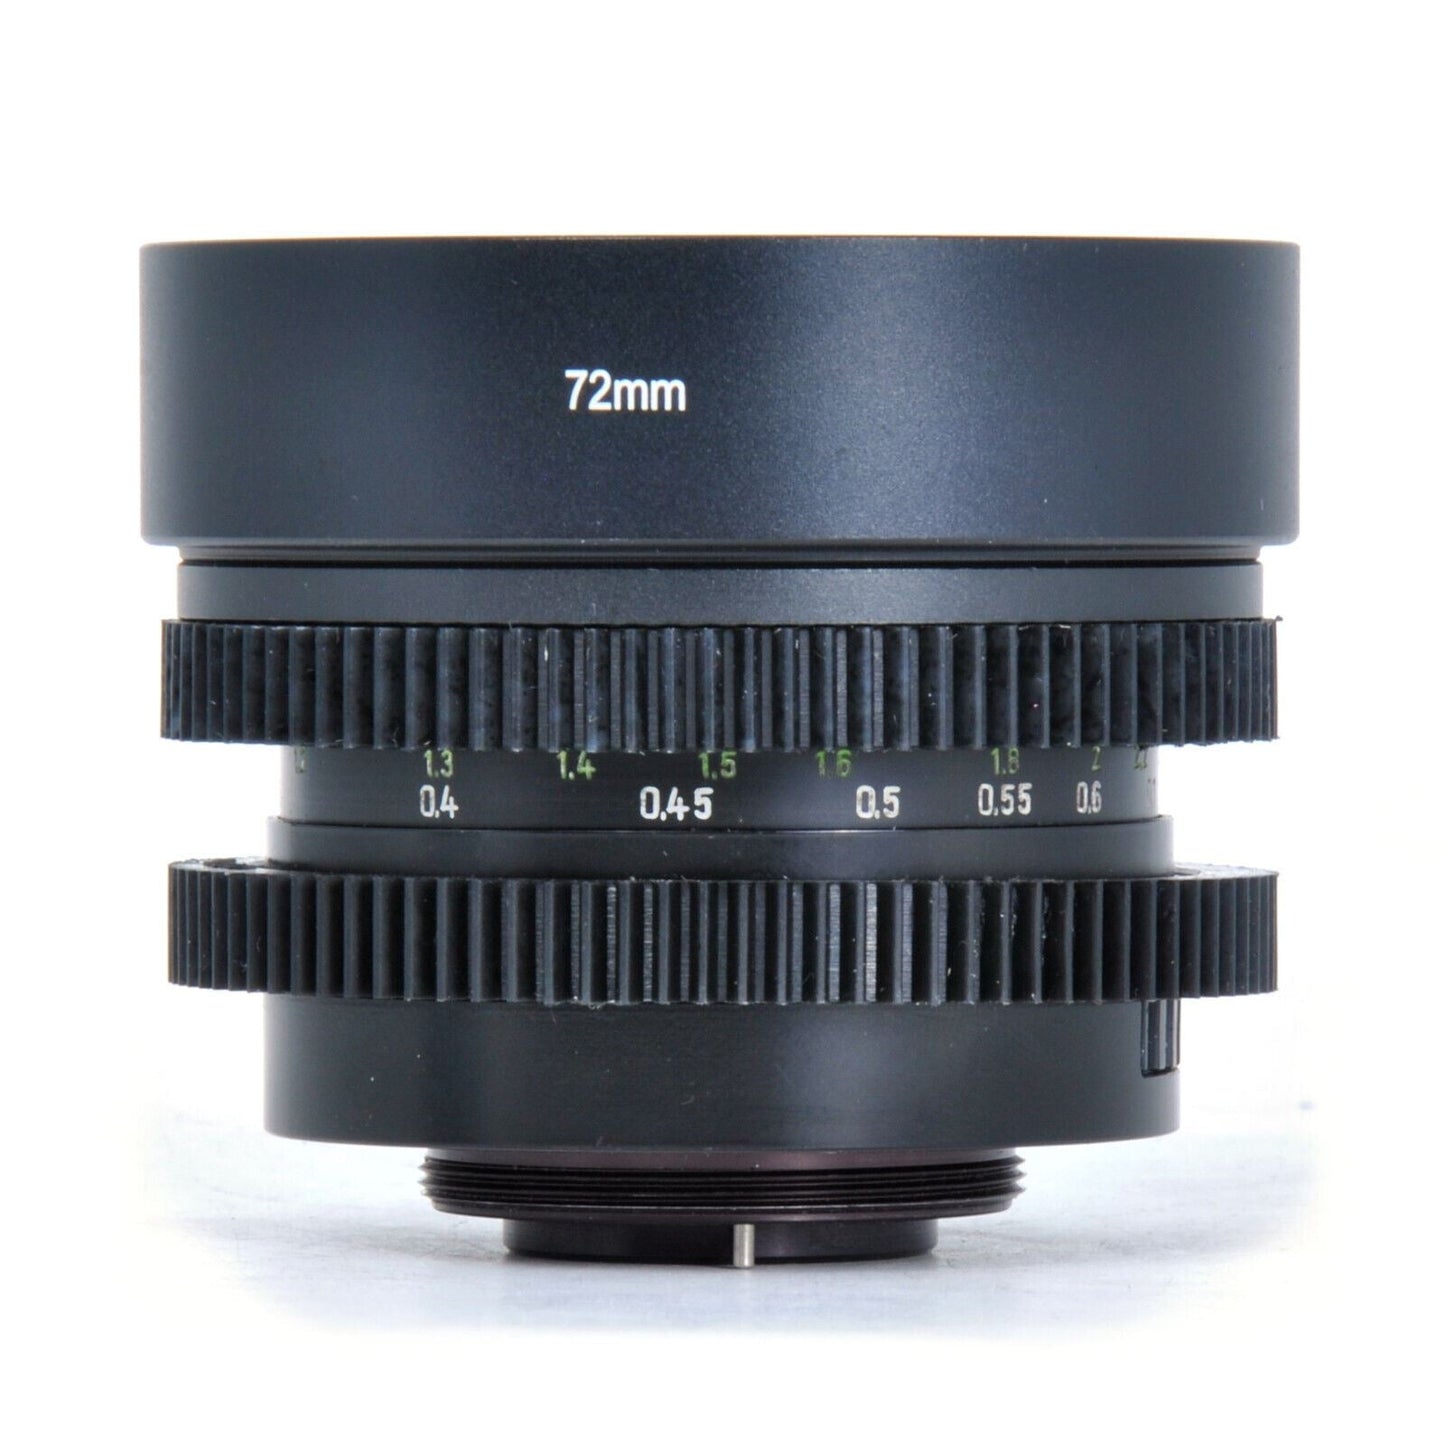 Carl Zeiss Jena DDR Tessar 50mm F2.8 Cine Modded For Your Mount! - TerPhoto Store